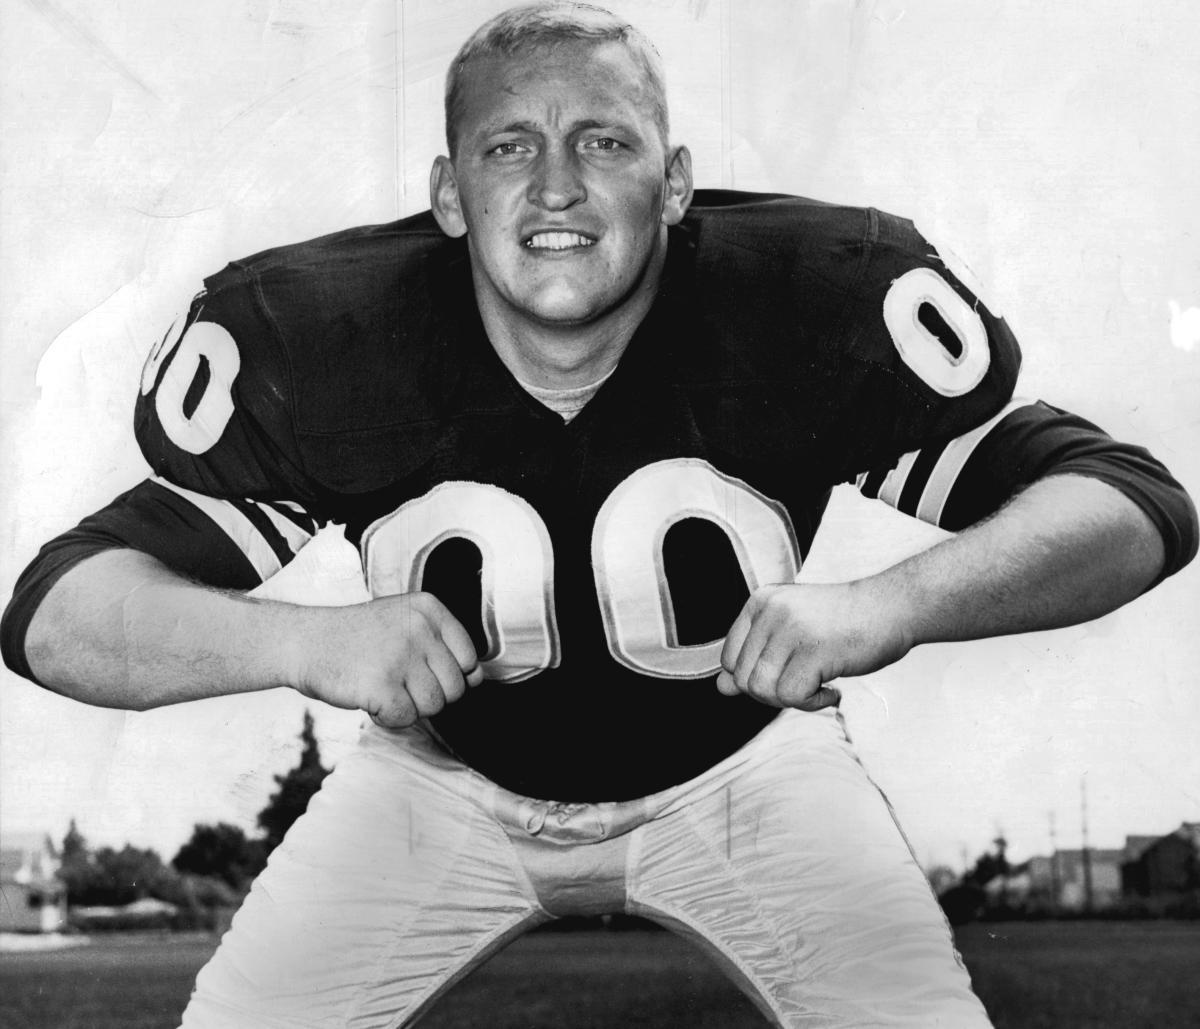 Longtime Oakland Raiders center, Hall of Famer Jim Otto dies at 86